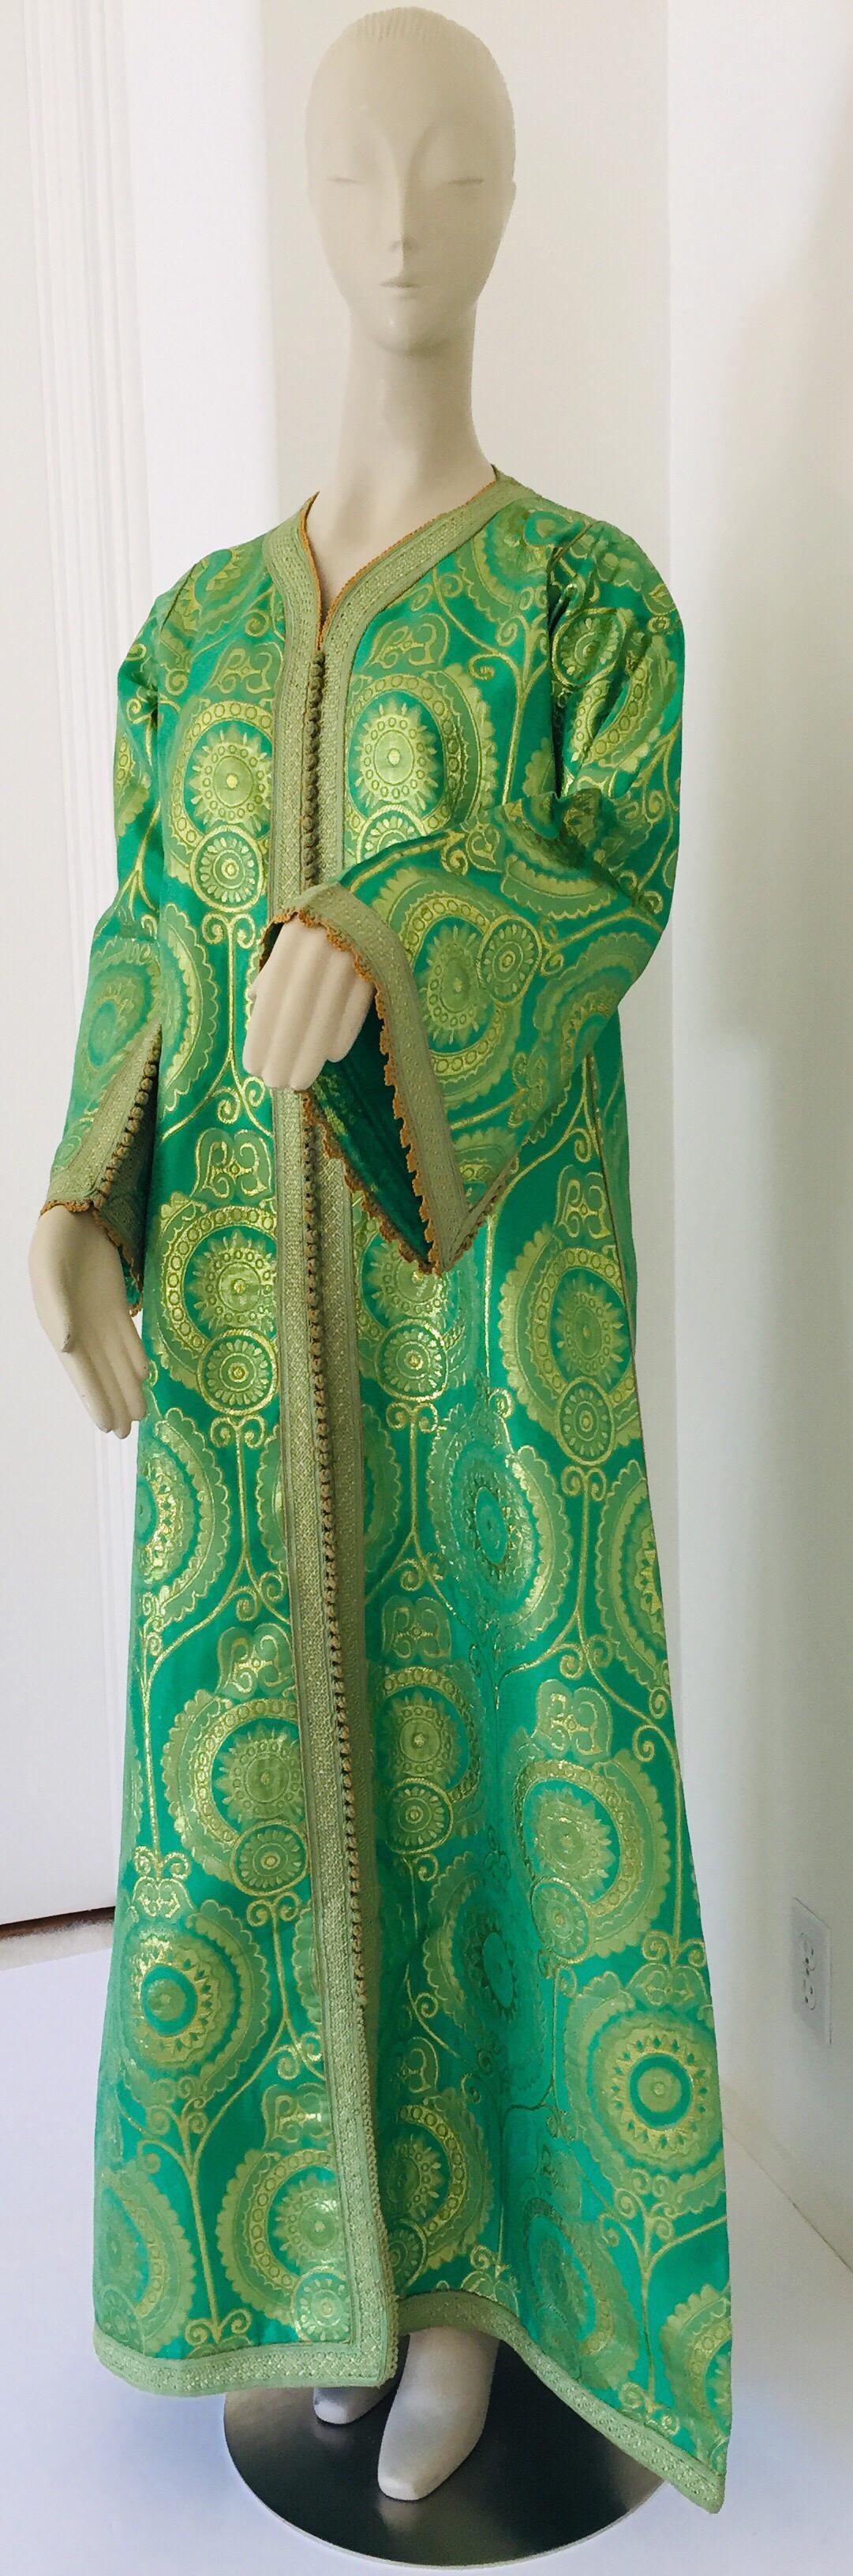 Elegant Moroccan caftan lime green and gold lame metallic floral brocade,
This is an exceptional example of Moroccan fashion design dating to the 1970s, 
Handcrafted in Morocco and tailored for a relaxed fit with wide sleeves, It is made in the